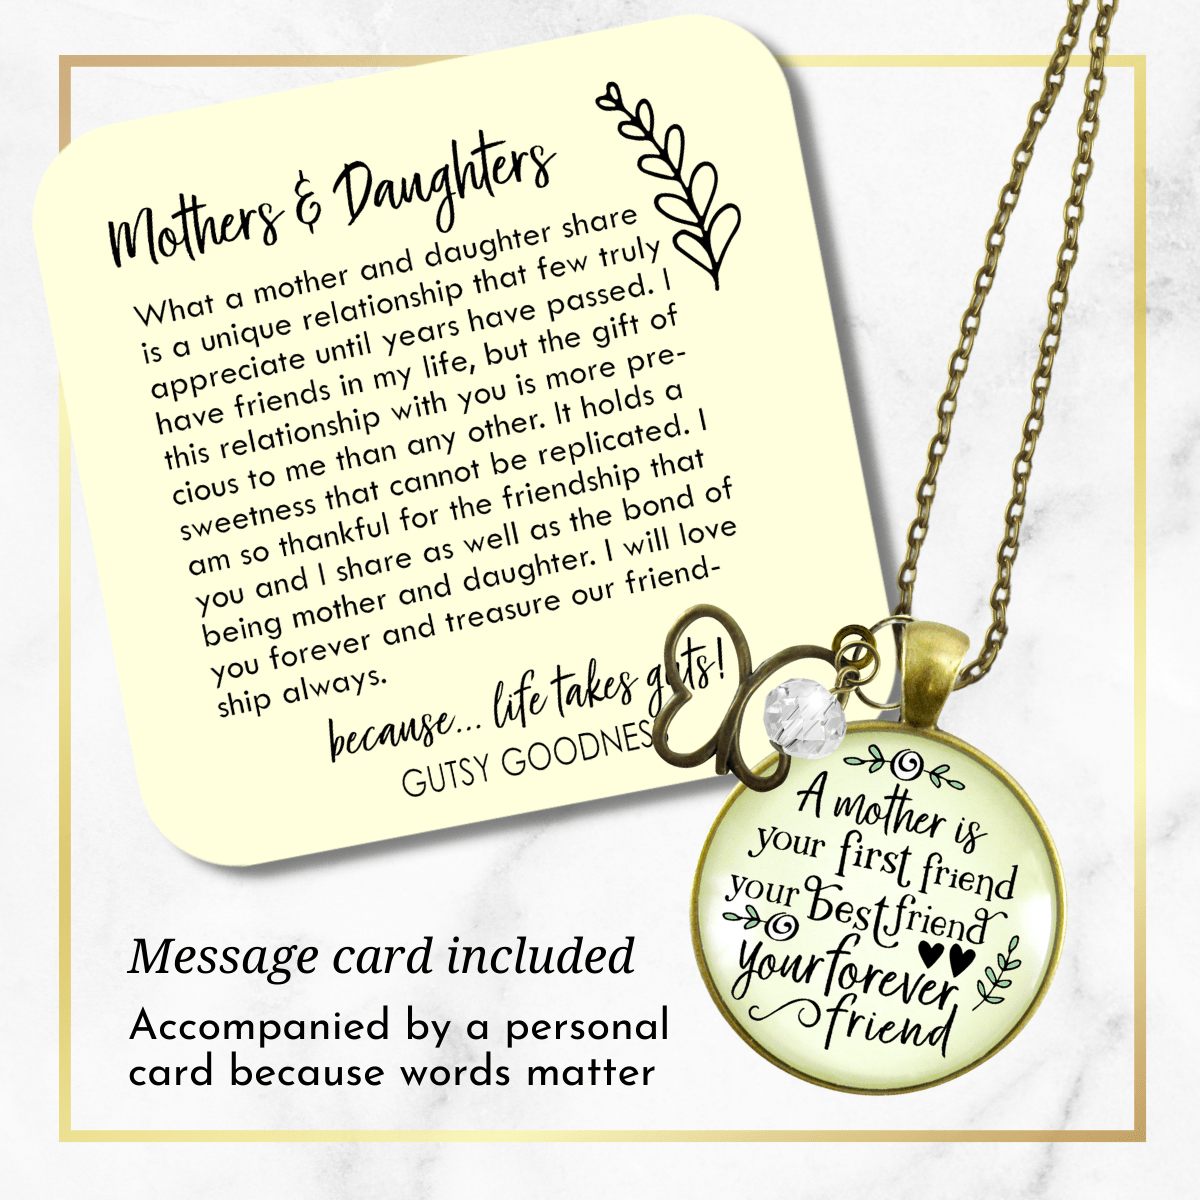 Gutsy Goodness Mother is First Friend Necklace BFF Word Quote Vintage Jewelry Gift - Gutsy Goodness Handmade Jewelry;Mother Is First Friend Necklace Bff Word Quote Vintage Jewelry Gift - Gutsy Goodness Handmade Jewelry Gifts